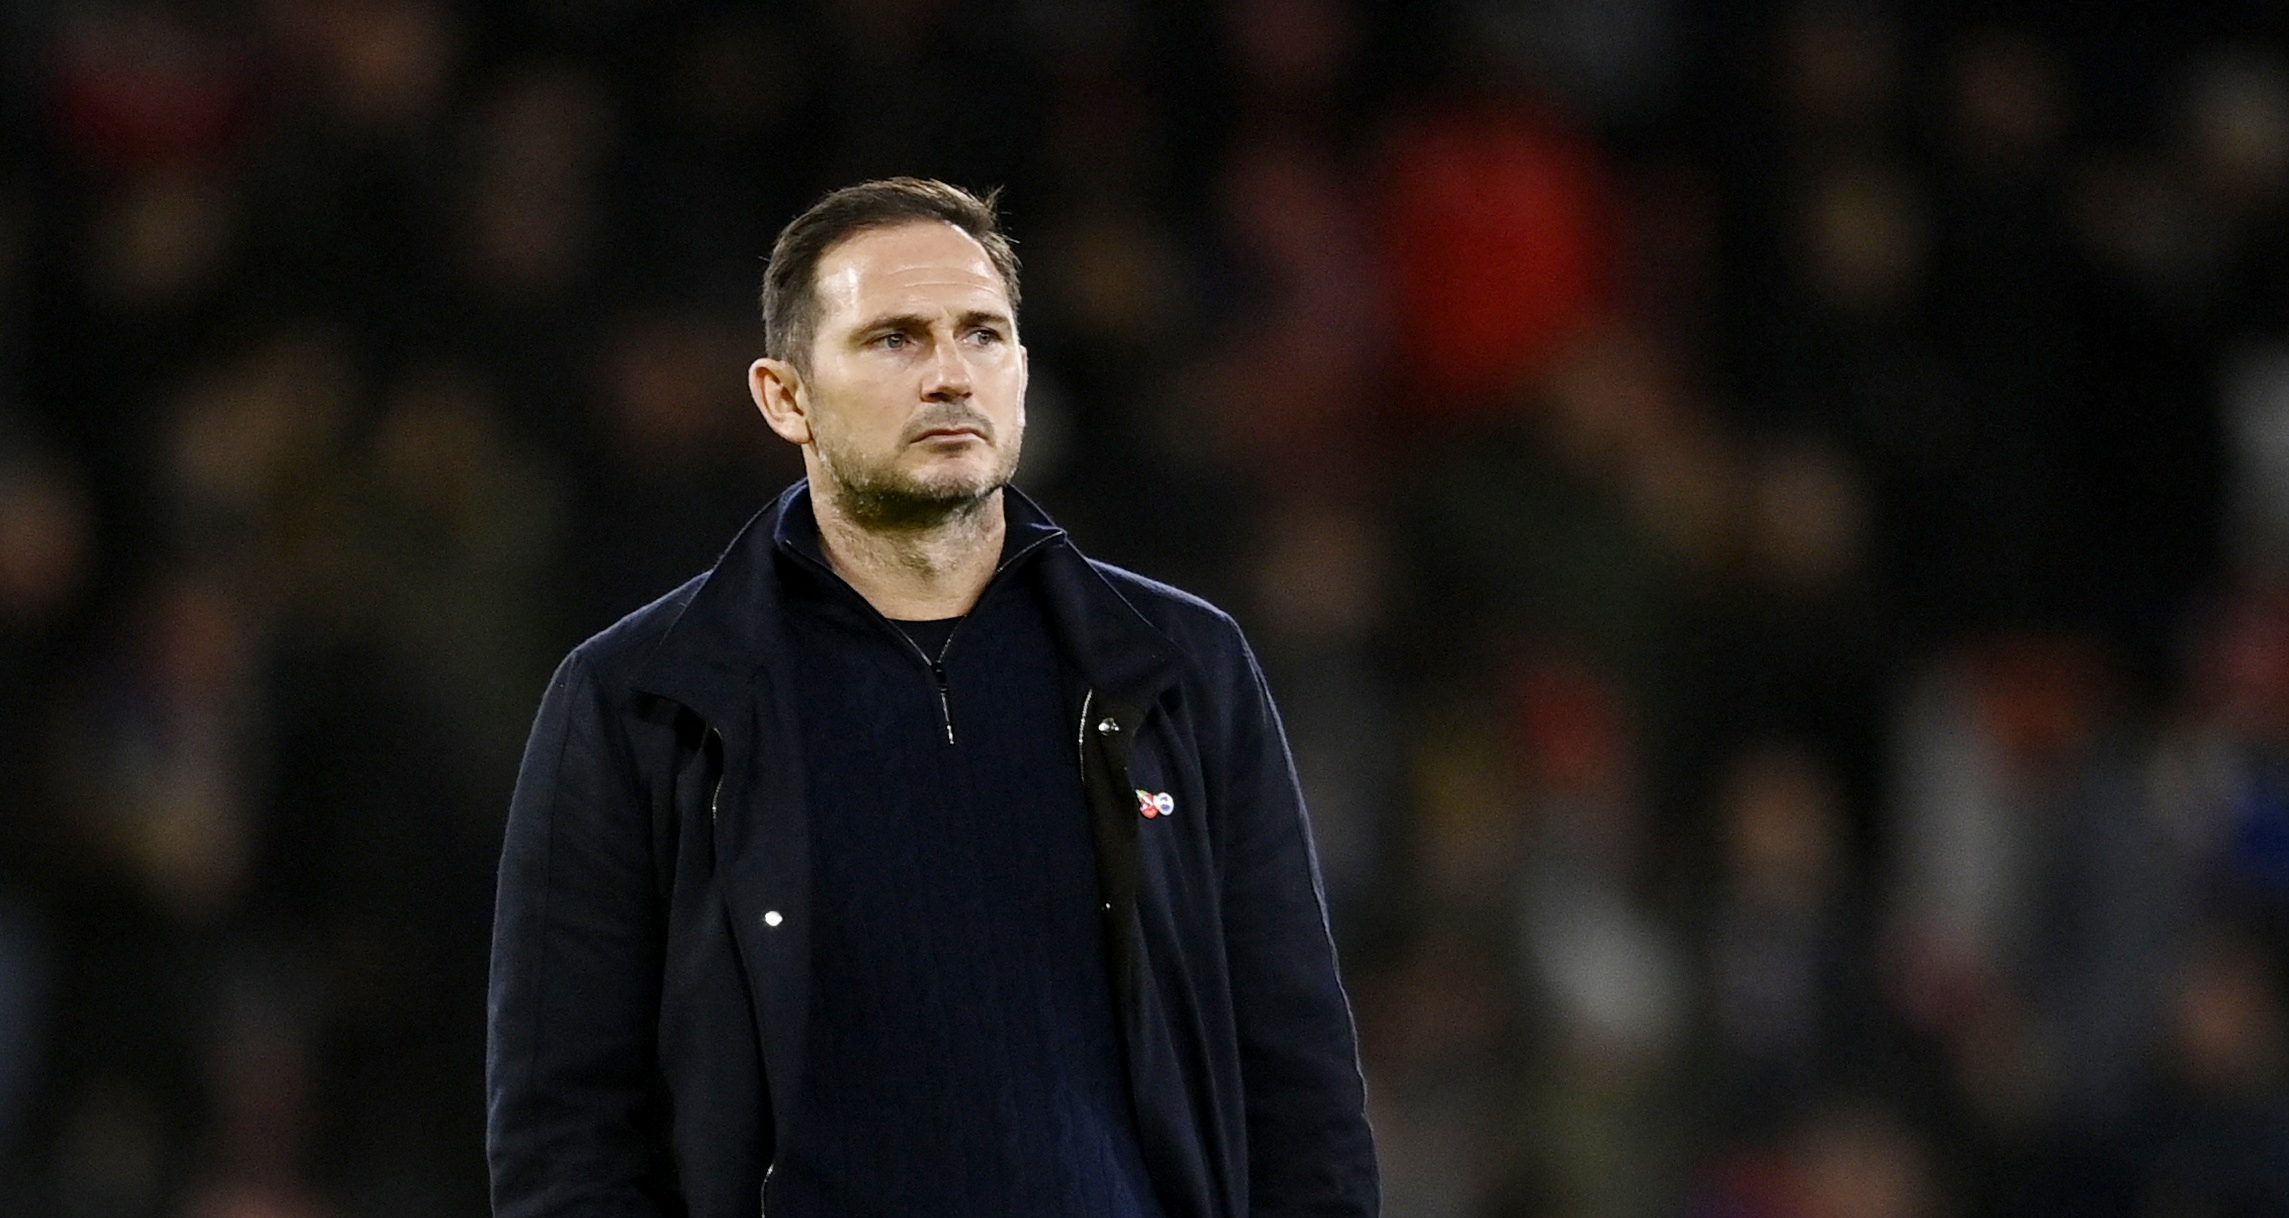 Soccer Football - Carabao Cup Third Round - AFC Bournemouth v Everton - Vitality Stadium, Bournemouth, Britain - November 8, 2022 Everton manager Frank Lampard looks dejected after the match REUTERS/Tony Obrien EDITORIAL USE ONLY. No use with unauthorized audio, video, data, fixture lists, club/league logos or 'live' services. Online in-match use limited to 75 images, no video emulation. No use in betting, games or single club /league/player publications.  Please contact your account representat